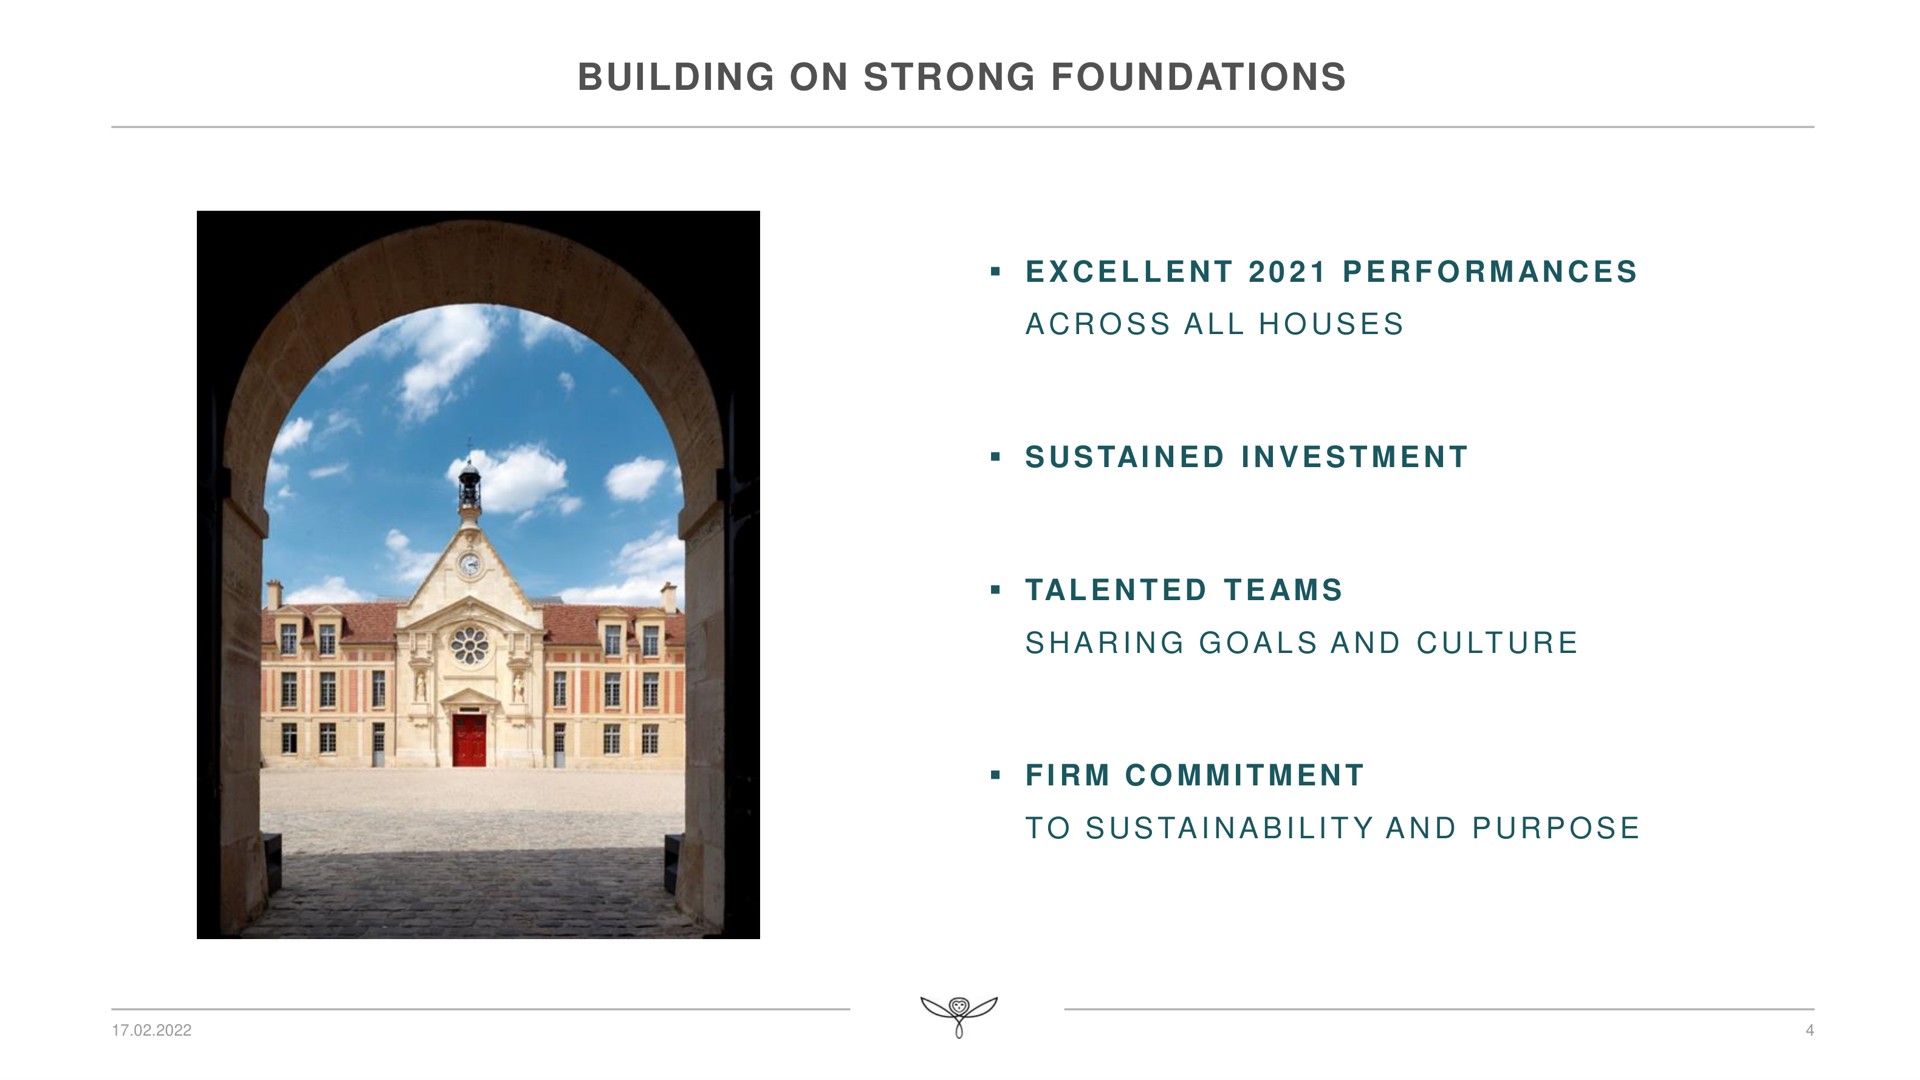 building on strong foundations | Kering